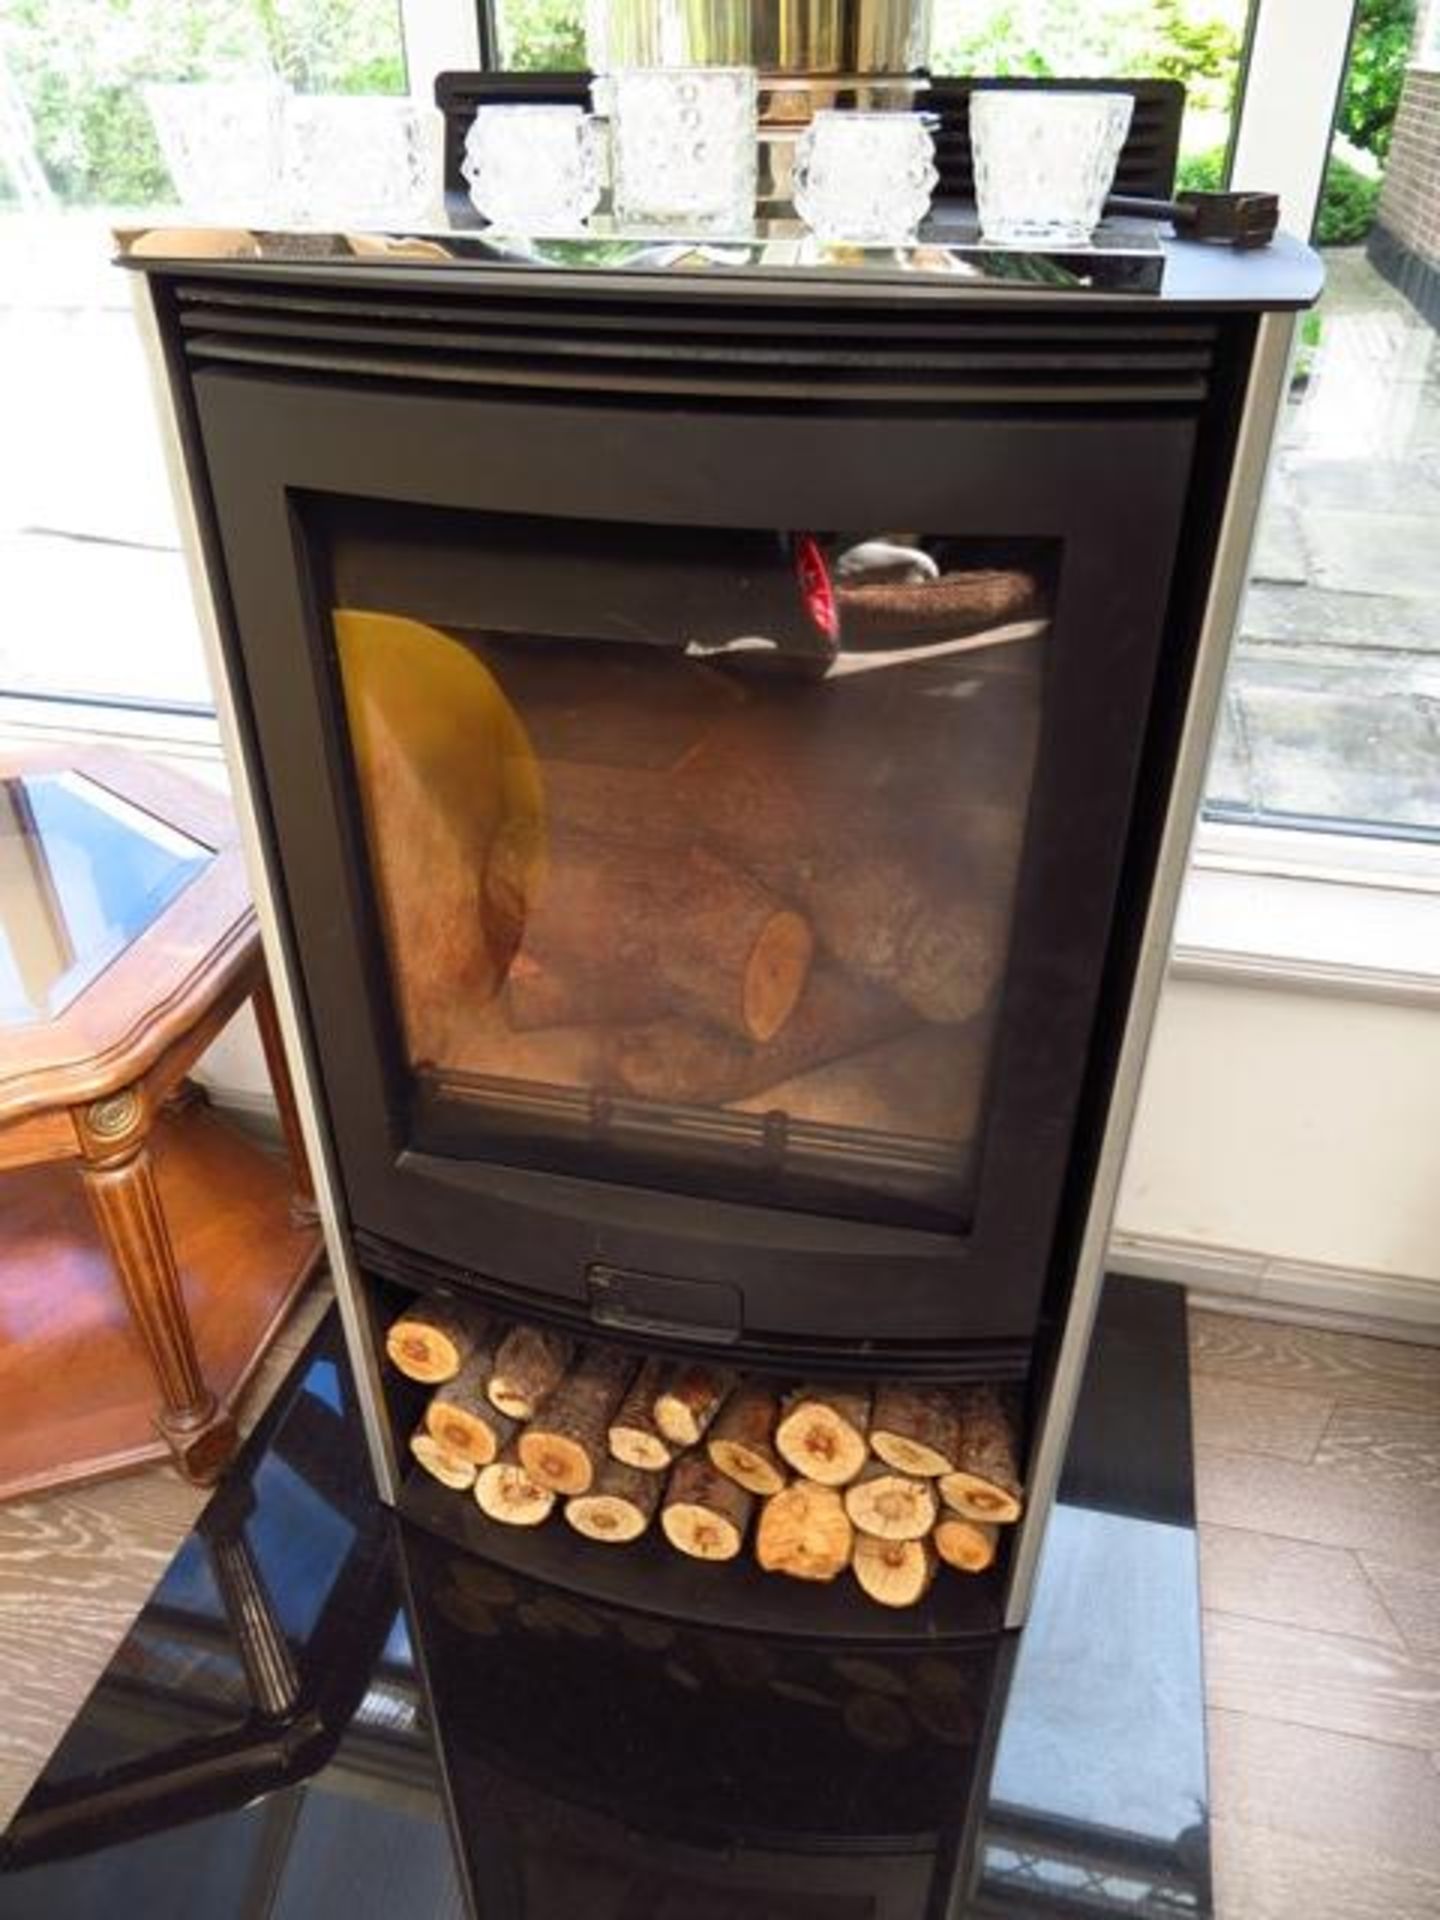 Dilusso R5 Euro BSEN 13240 Wood Burning Stove Efficiency 79% Nominal Heat Output 4.9Kw Mean CO